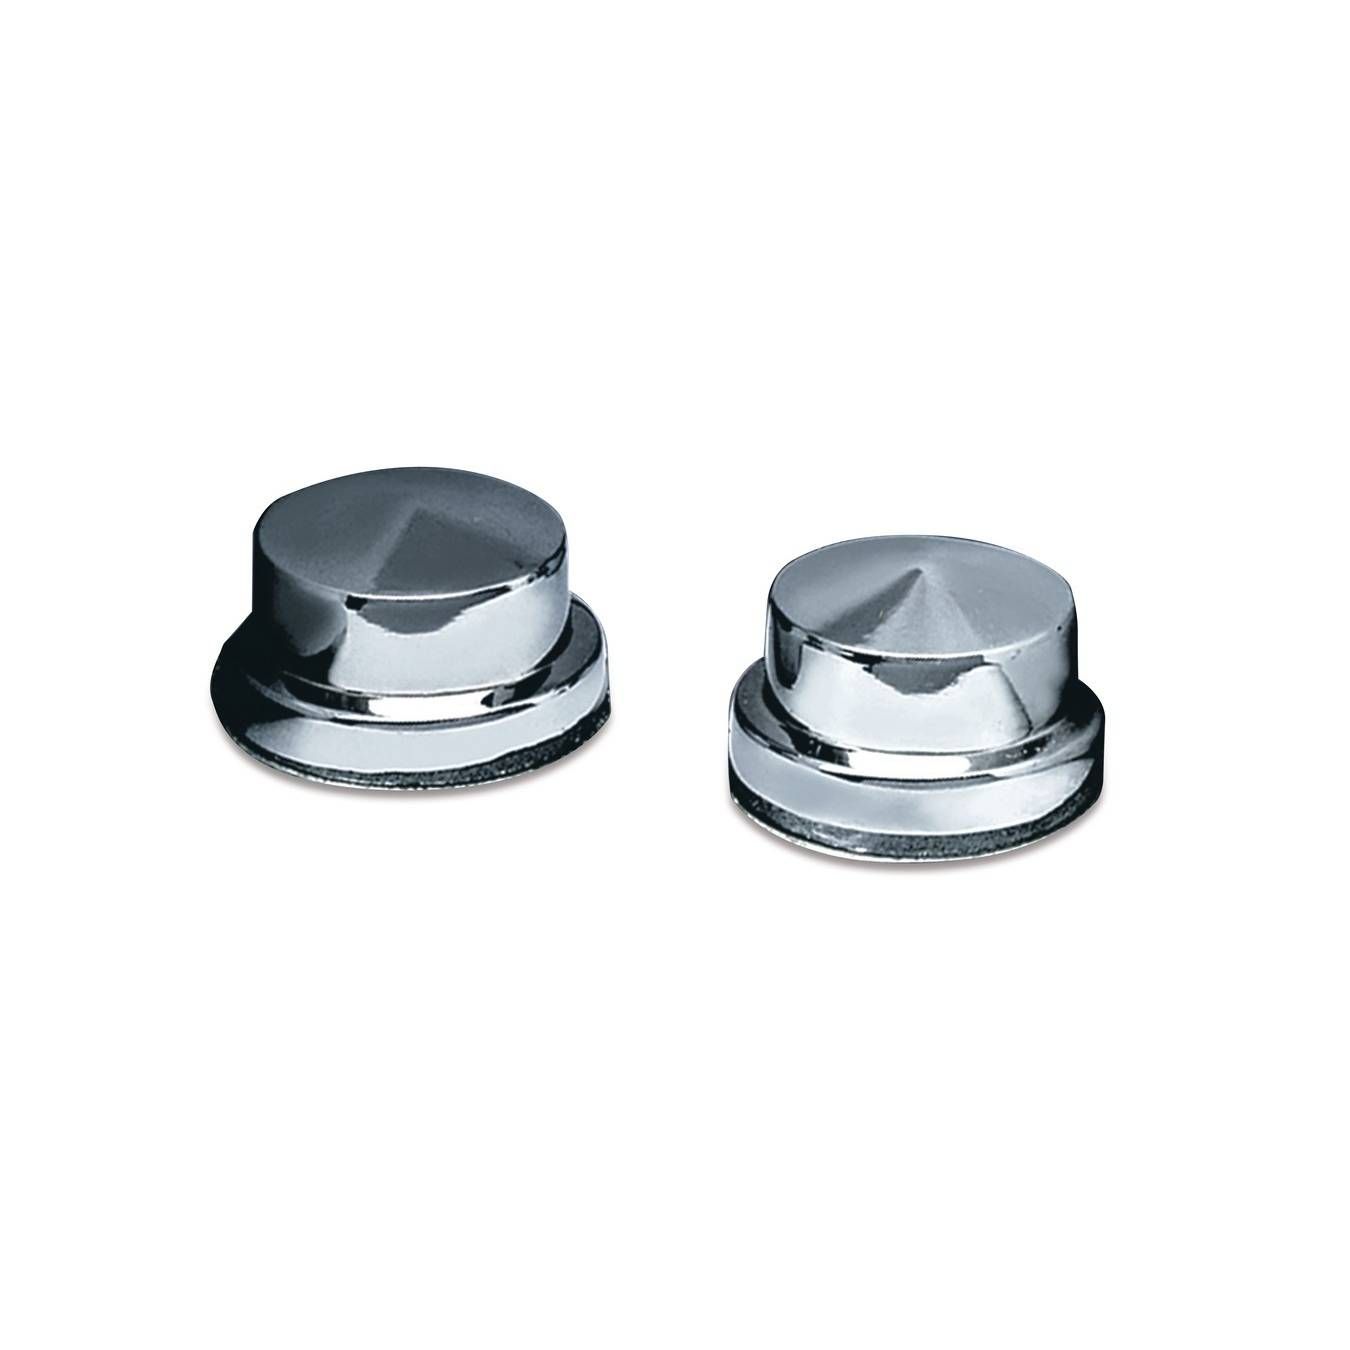 Pro-One Oil Tank Mounting Stud Covers 302190 